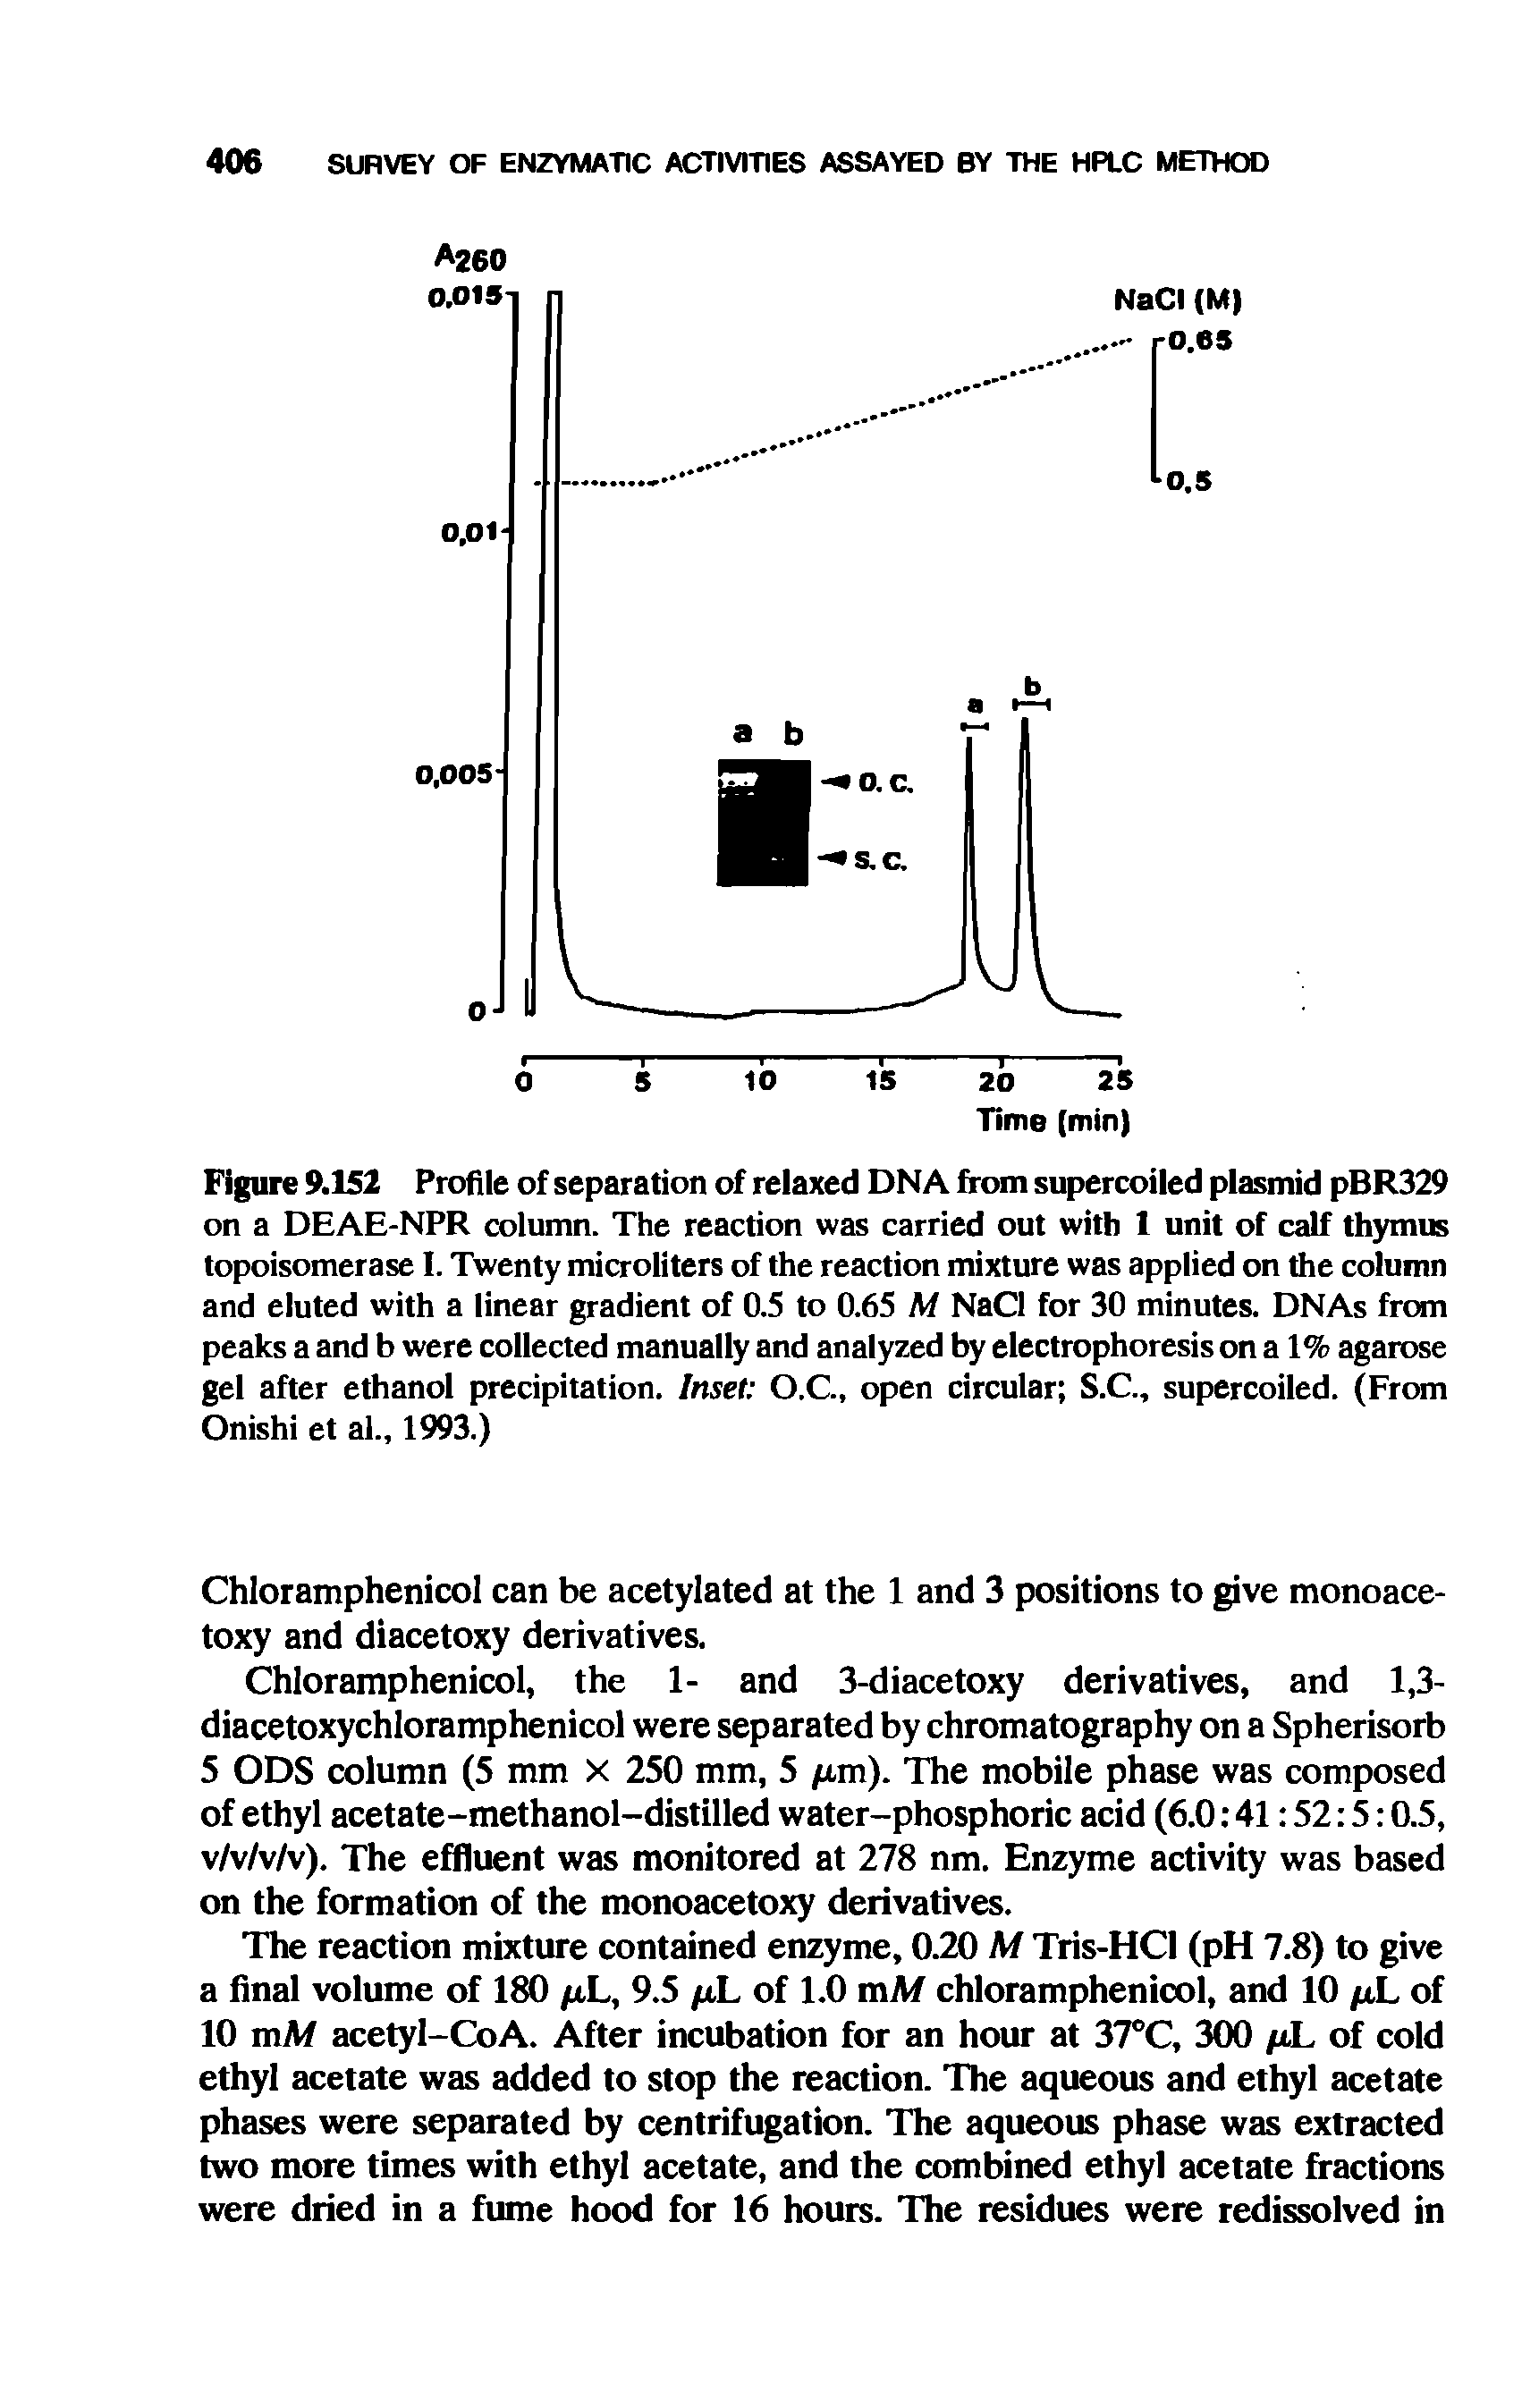 Figure 9.152 Profile of separation of relaxed DNA from supercoiled plasmid pBR329 on a DEAE-NPR column. The reaction was carried out with 1 unit of calf thymus topoisomerase I. Twenty microliters of the reaction mixture was applied on the column and eluted with a linear gradient of 0.5 to 0.65 M NaCl for 30 minutes. DNAs from peaks a and b were collected manually and analyzed by electrophoresis on a 1% agarose gel after ethanol precipitation. Inset O.C., open circular S.C., supercoiled. (From Onishi et al., 1993.)...